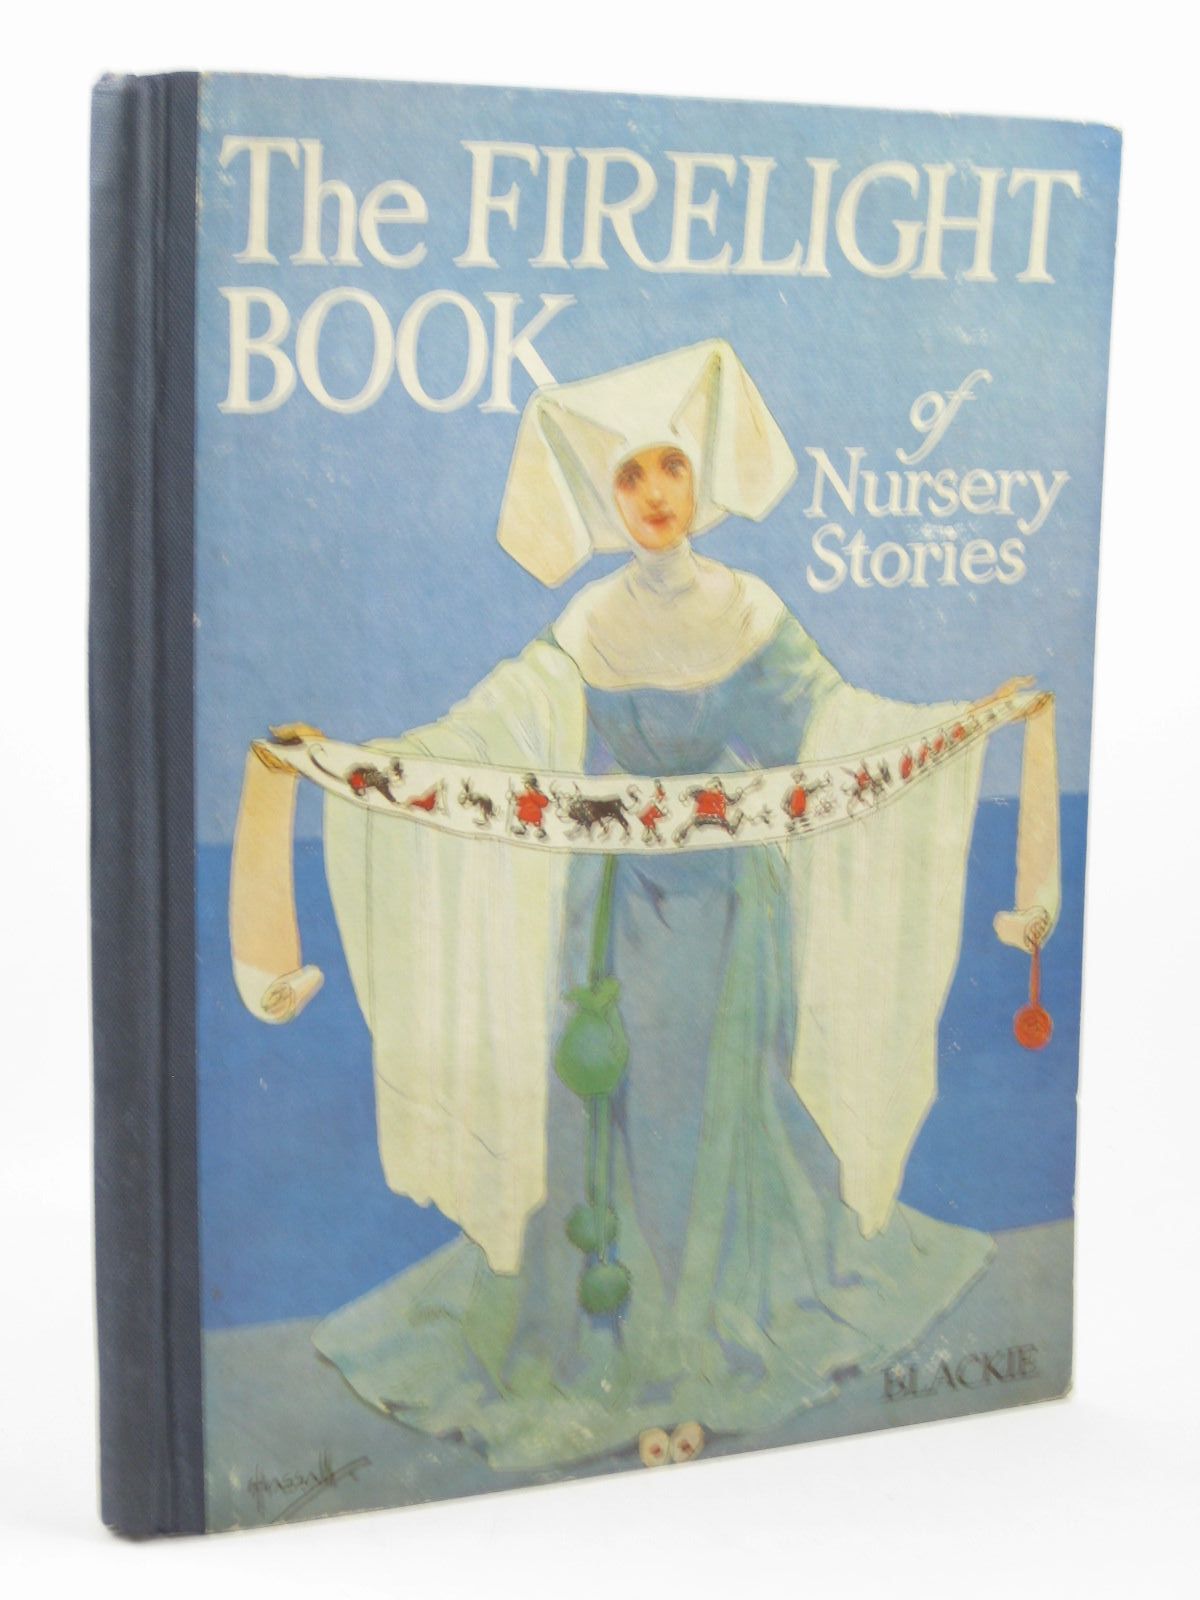 Photo of THE FIRELIGHT BOOK OF NURSERY STORIES illustrated by Hassall, John published by Blackie & Son Ltd. (STOCK CODE: 1312639)  for sale by Stella & Rose's Books